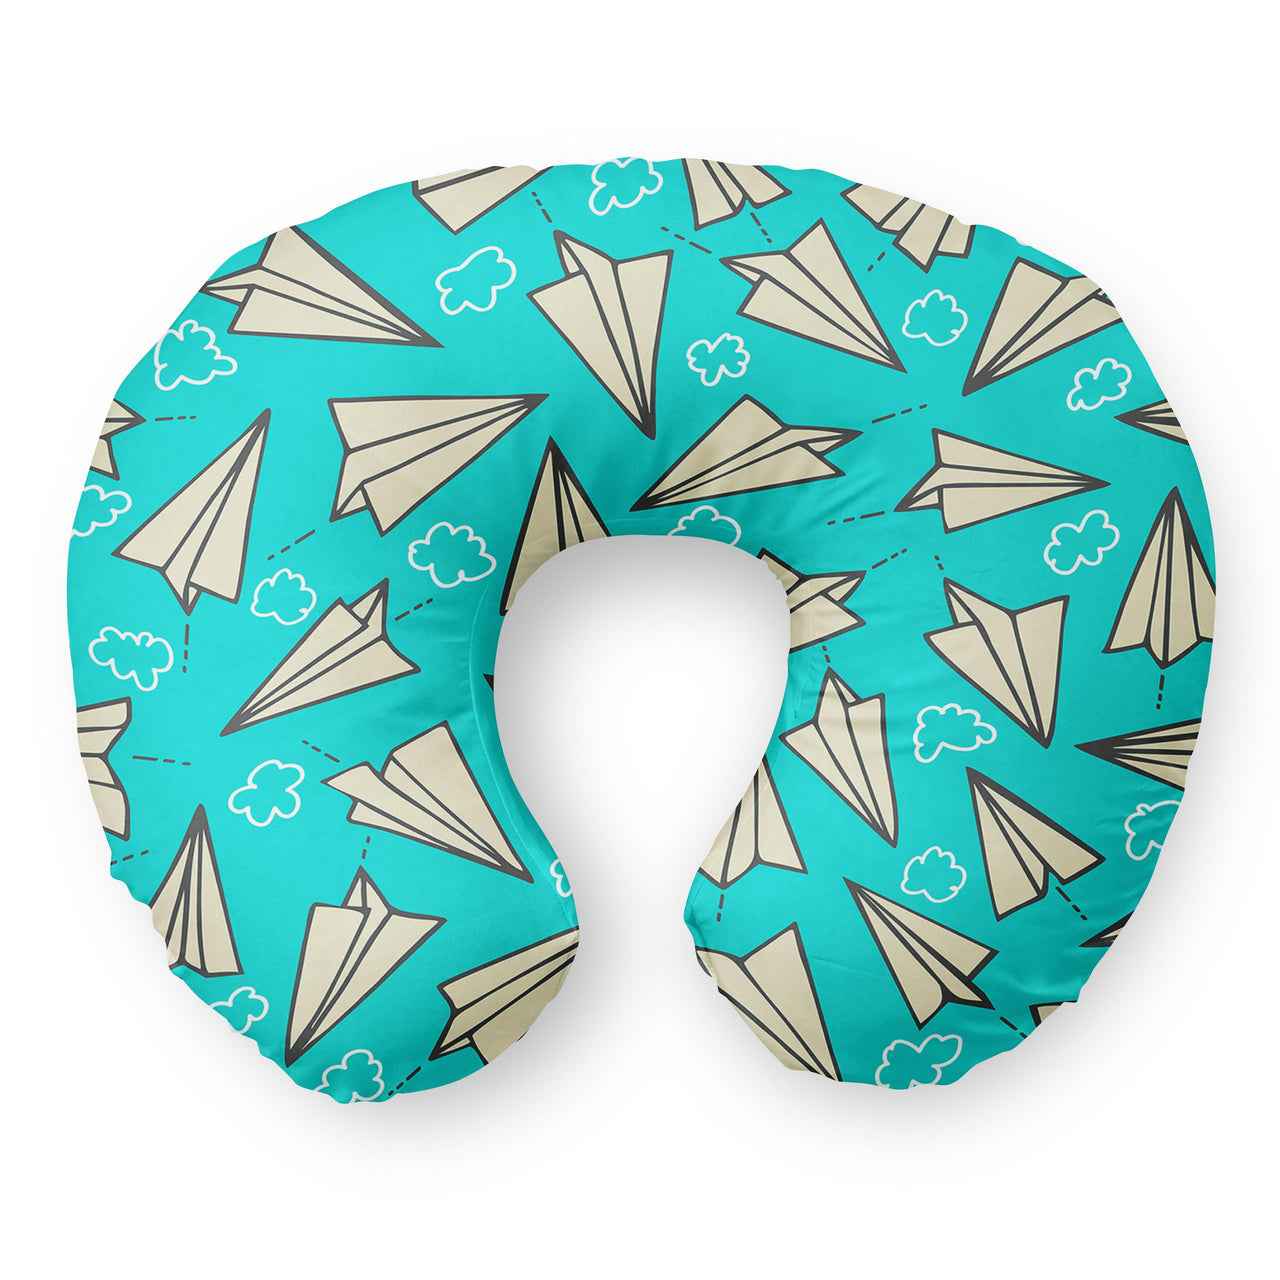 Super Cool Paper Airplanes Travel & Boppy Pillows